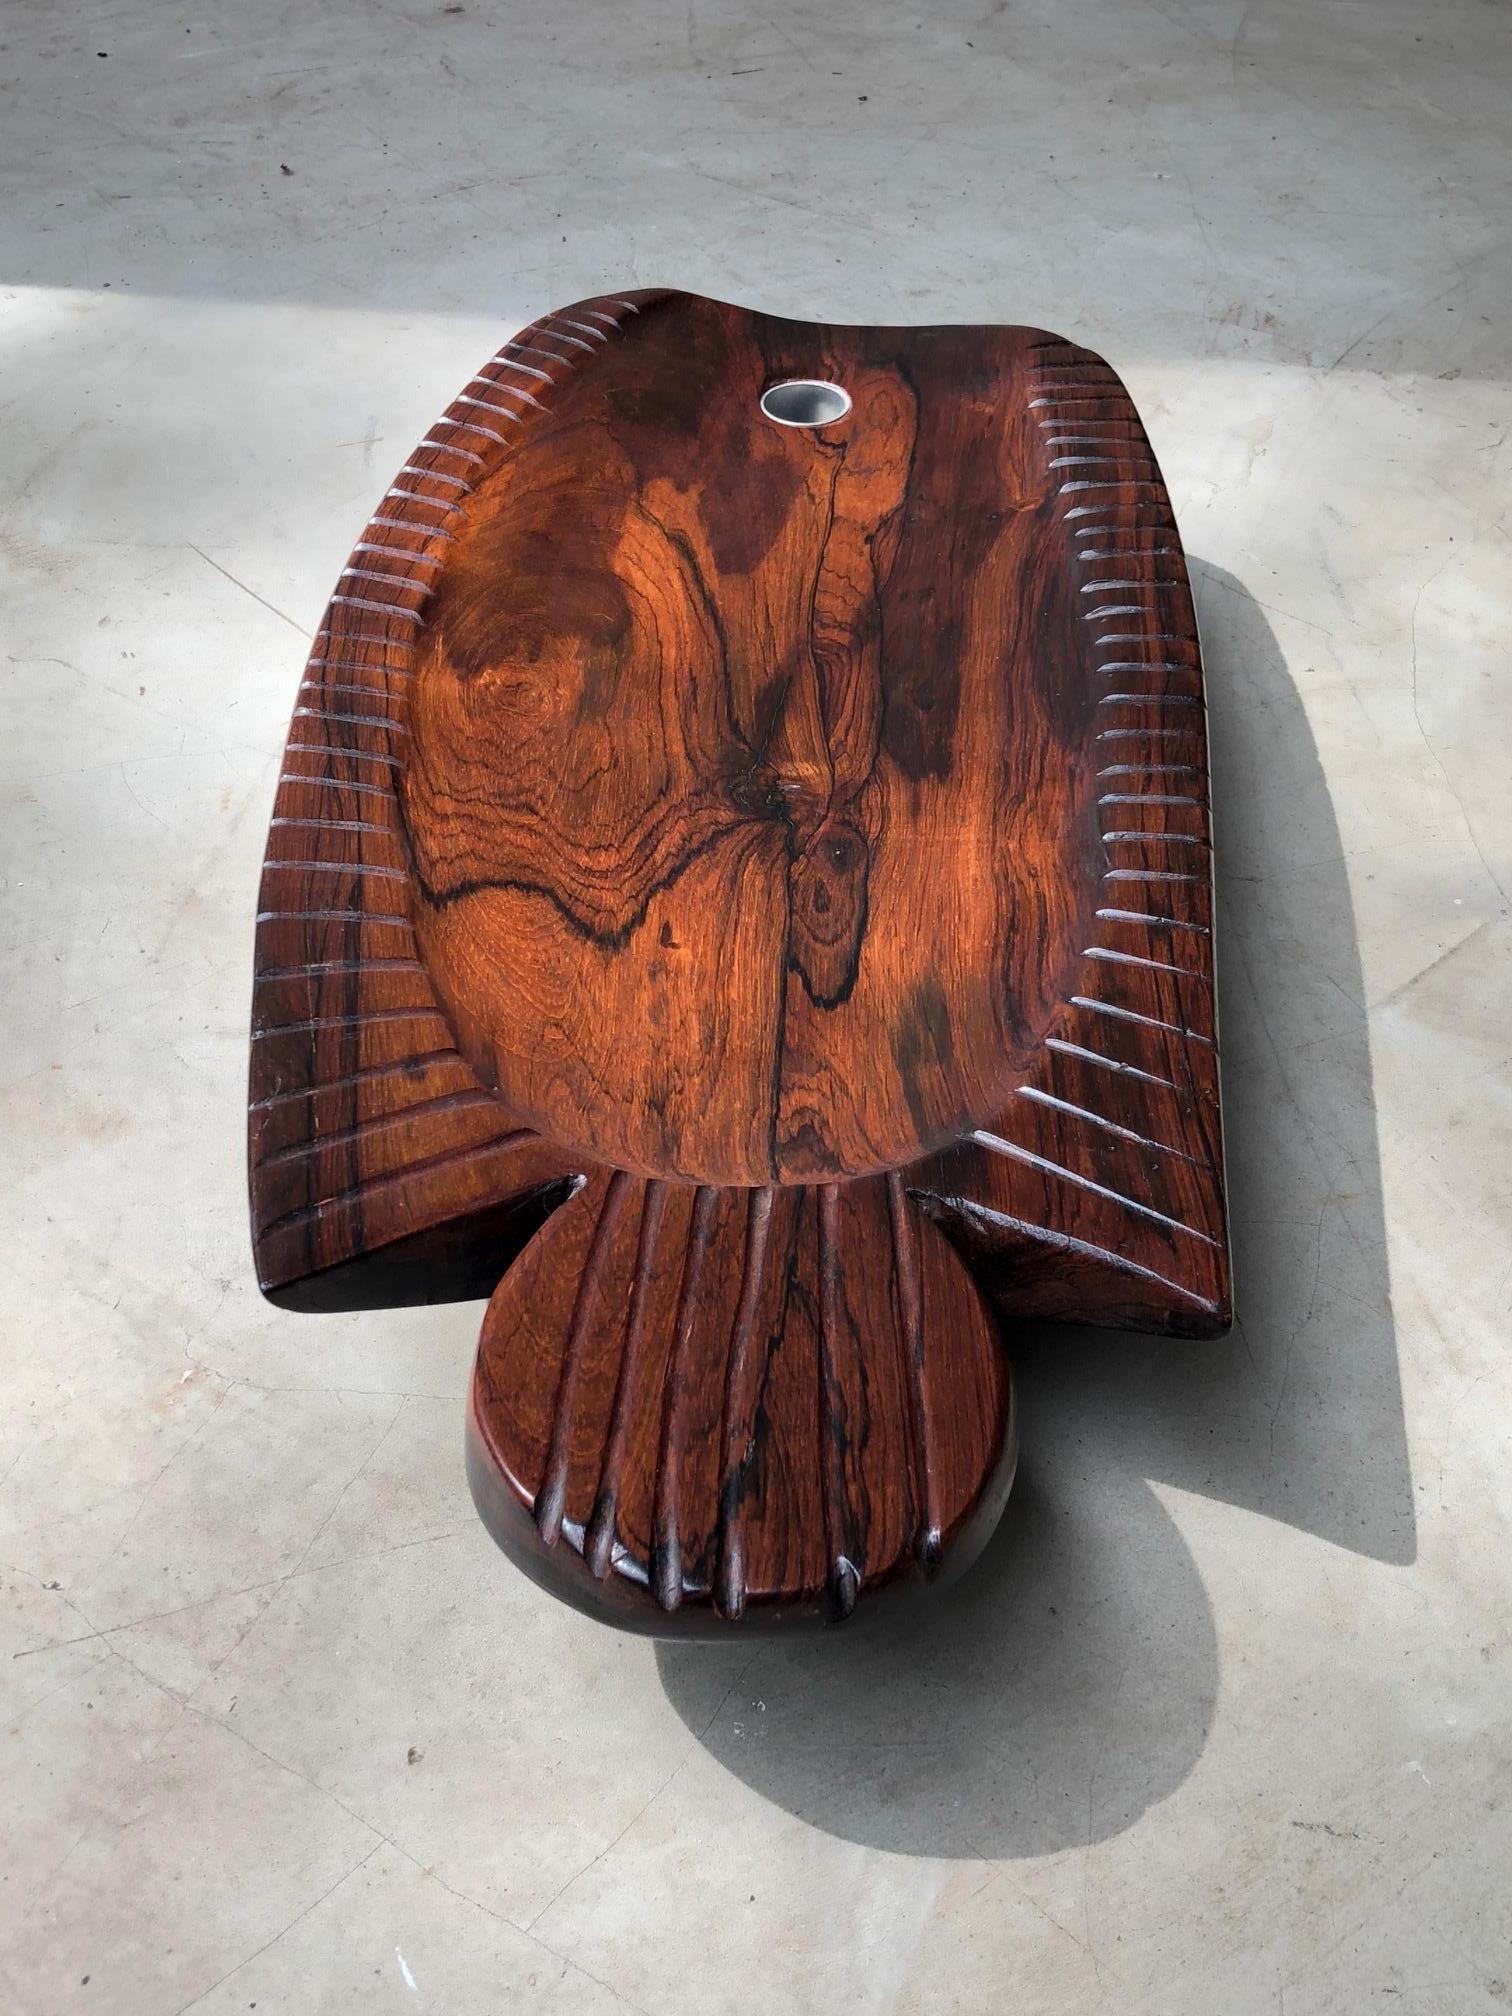 Stunning Vintage Tray / Sculpture Made of Brazilian Rosewood Unknown Author In Good Condition For Sale In Sao Paulo, SP